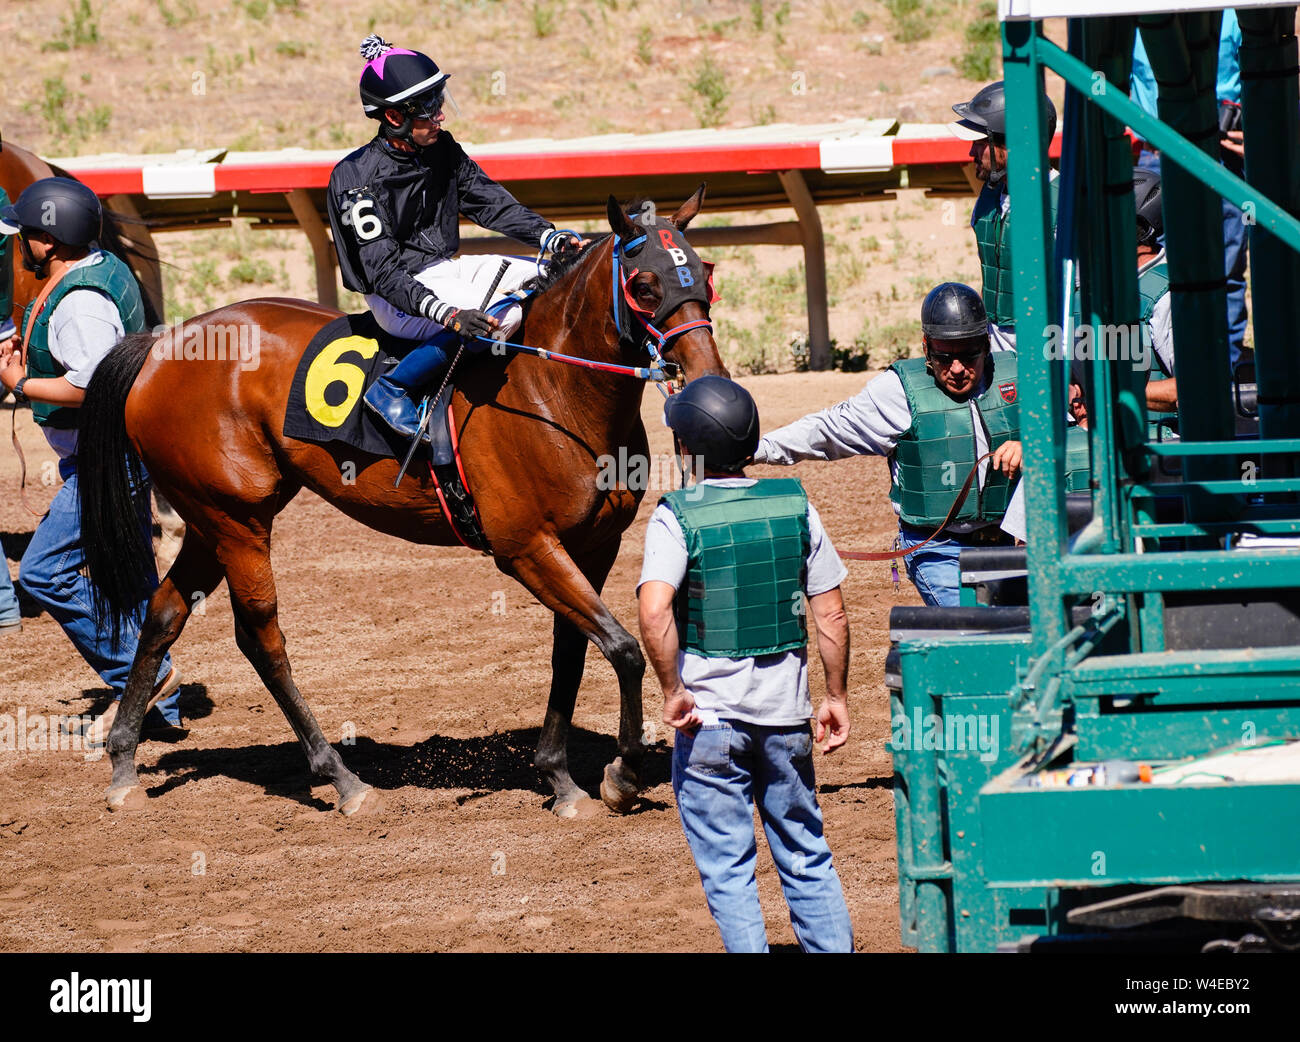 A race horse and jockey are being loaded into the starting gate. Stock Photo